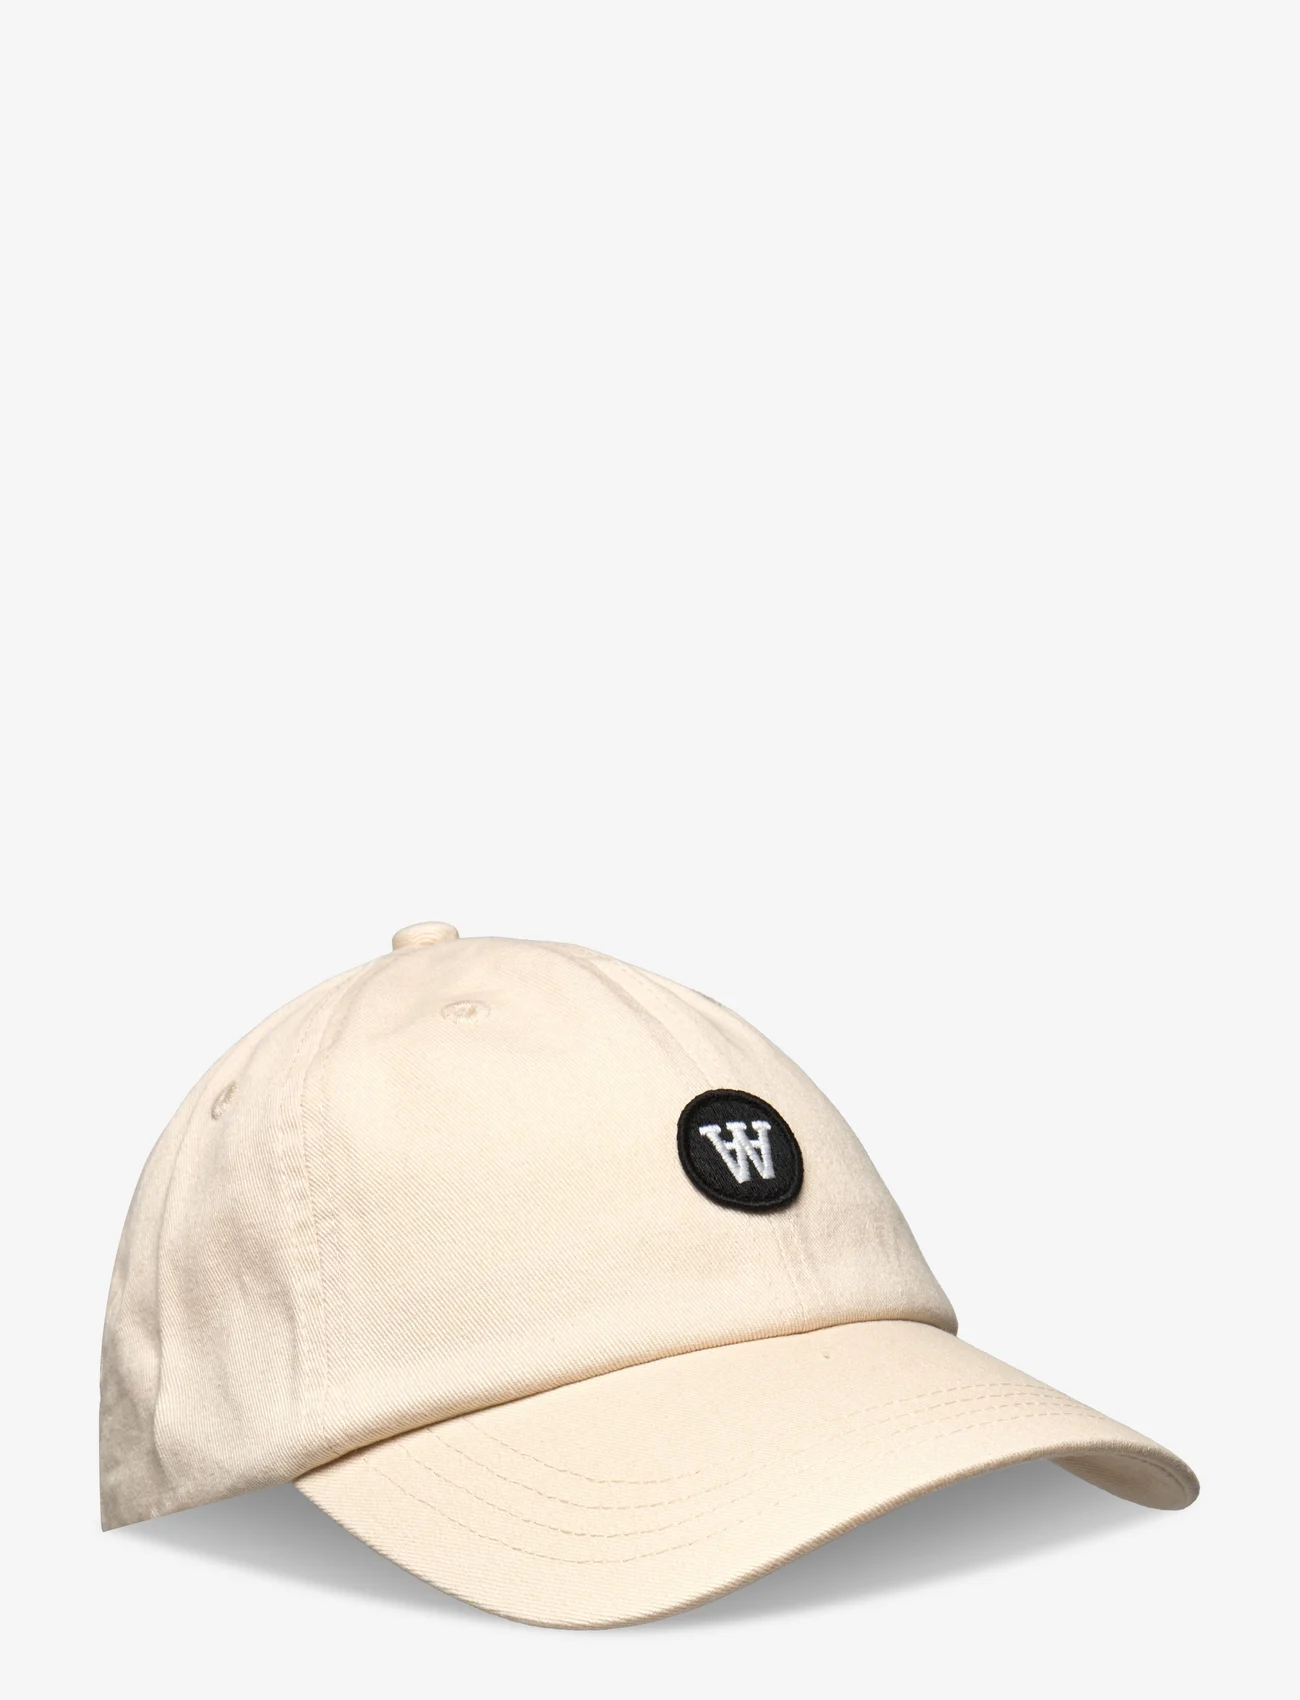 Double A by Wood Wood - Eli patch cap - caps - off-white - 0